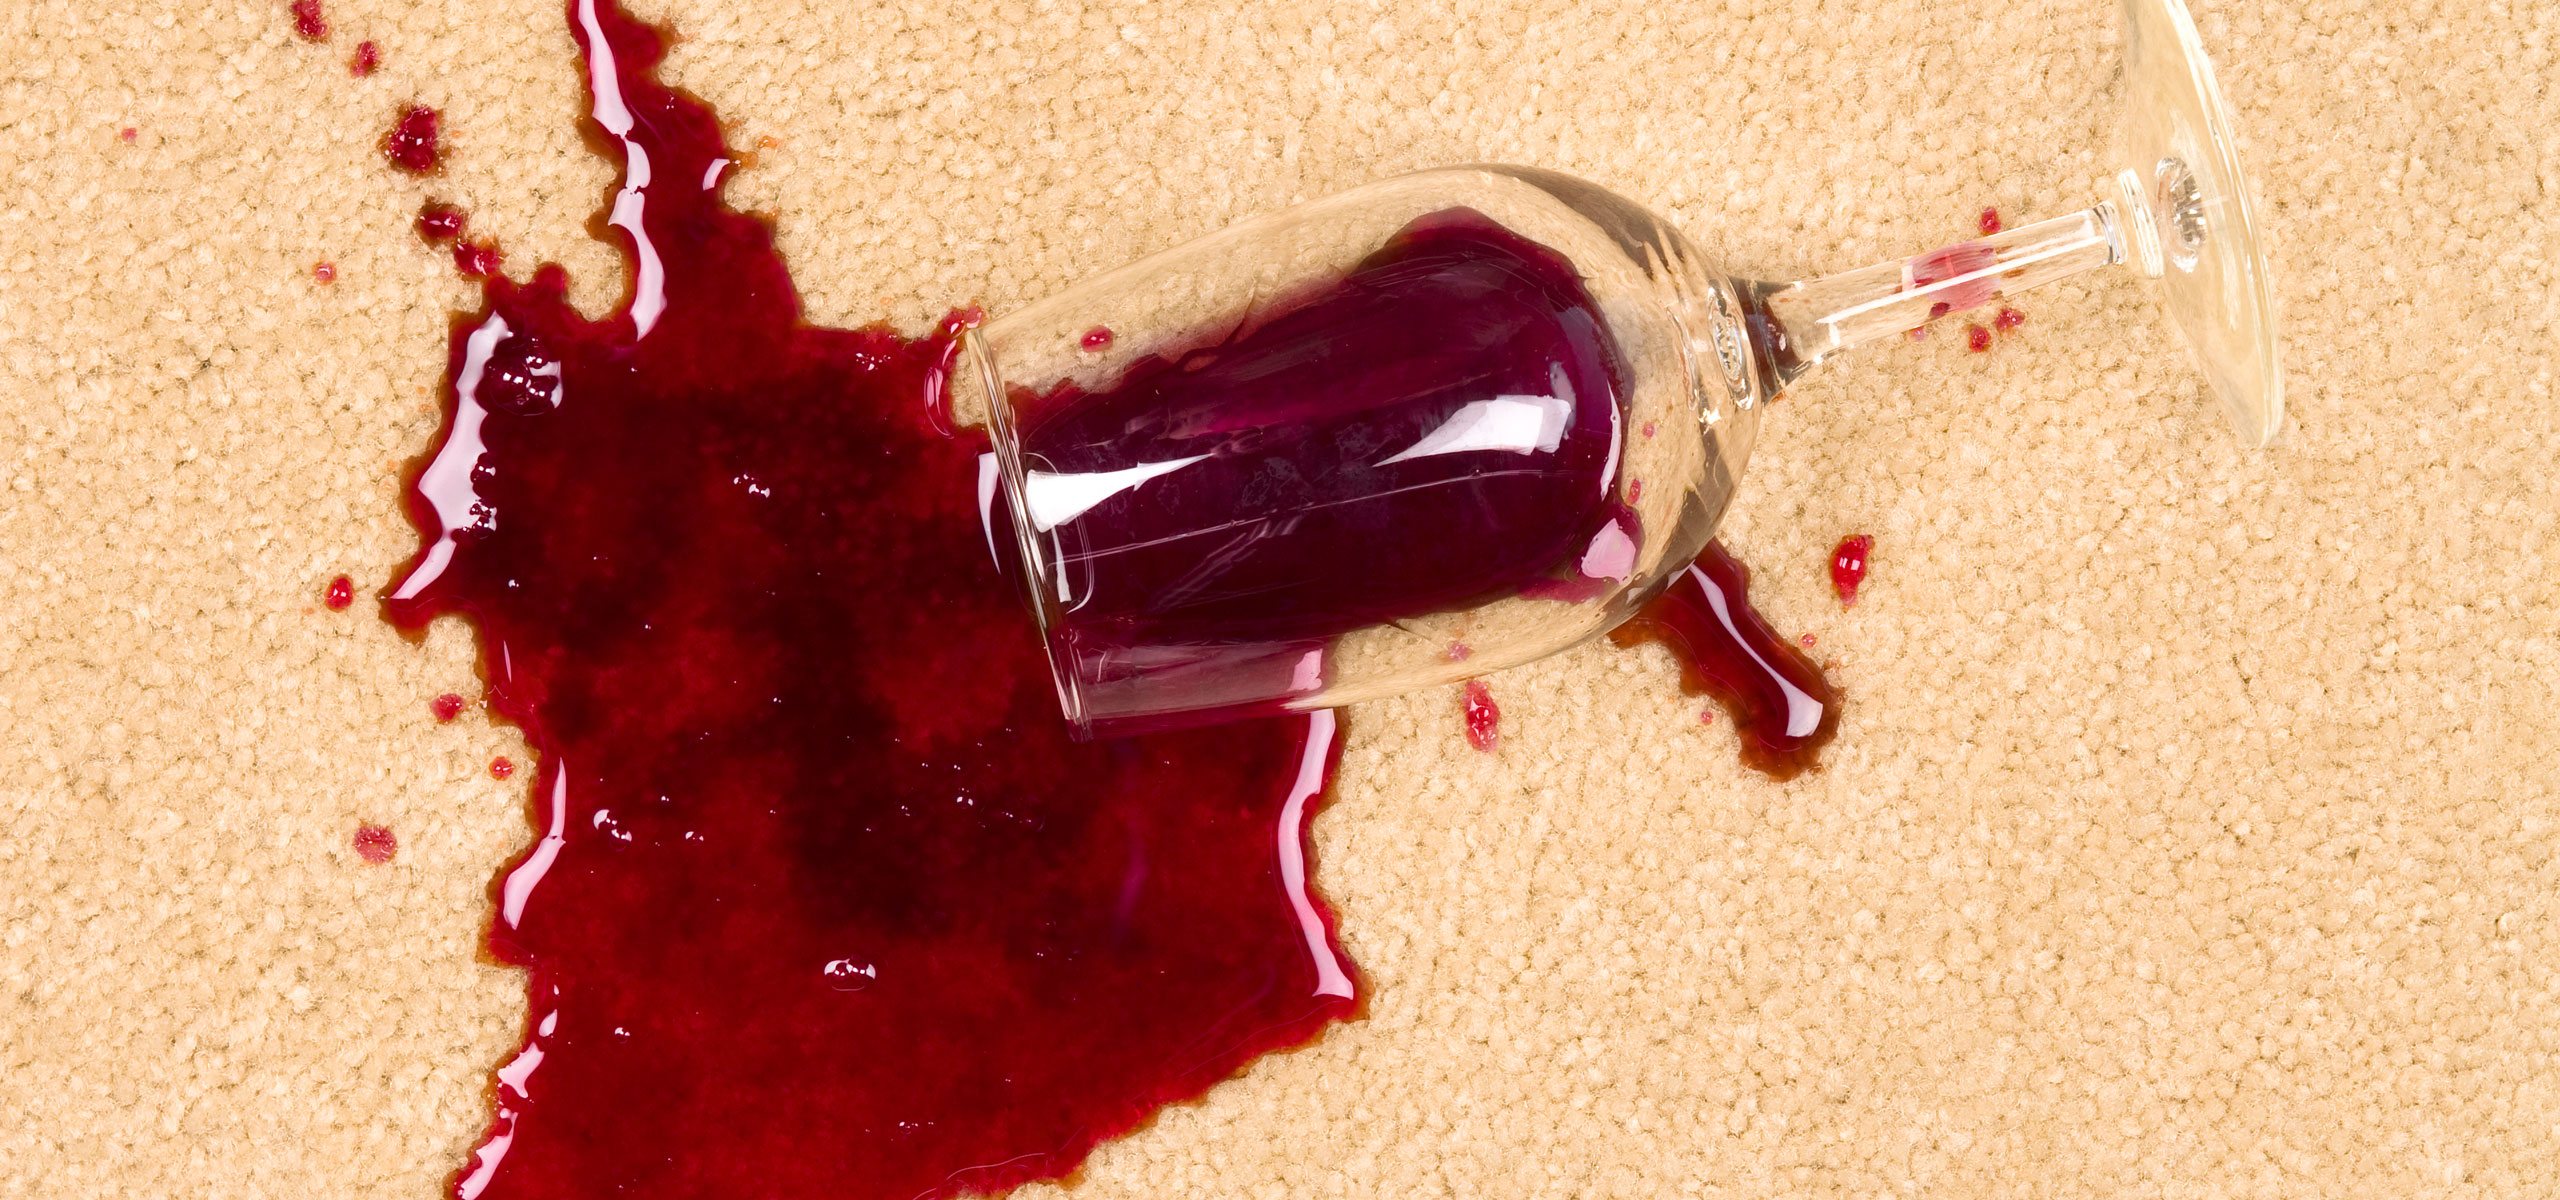 glass of red wine spilled on white carpet